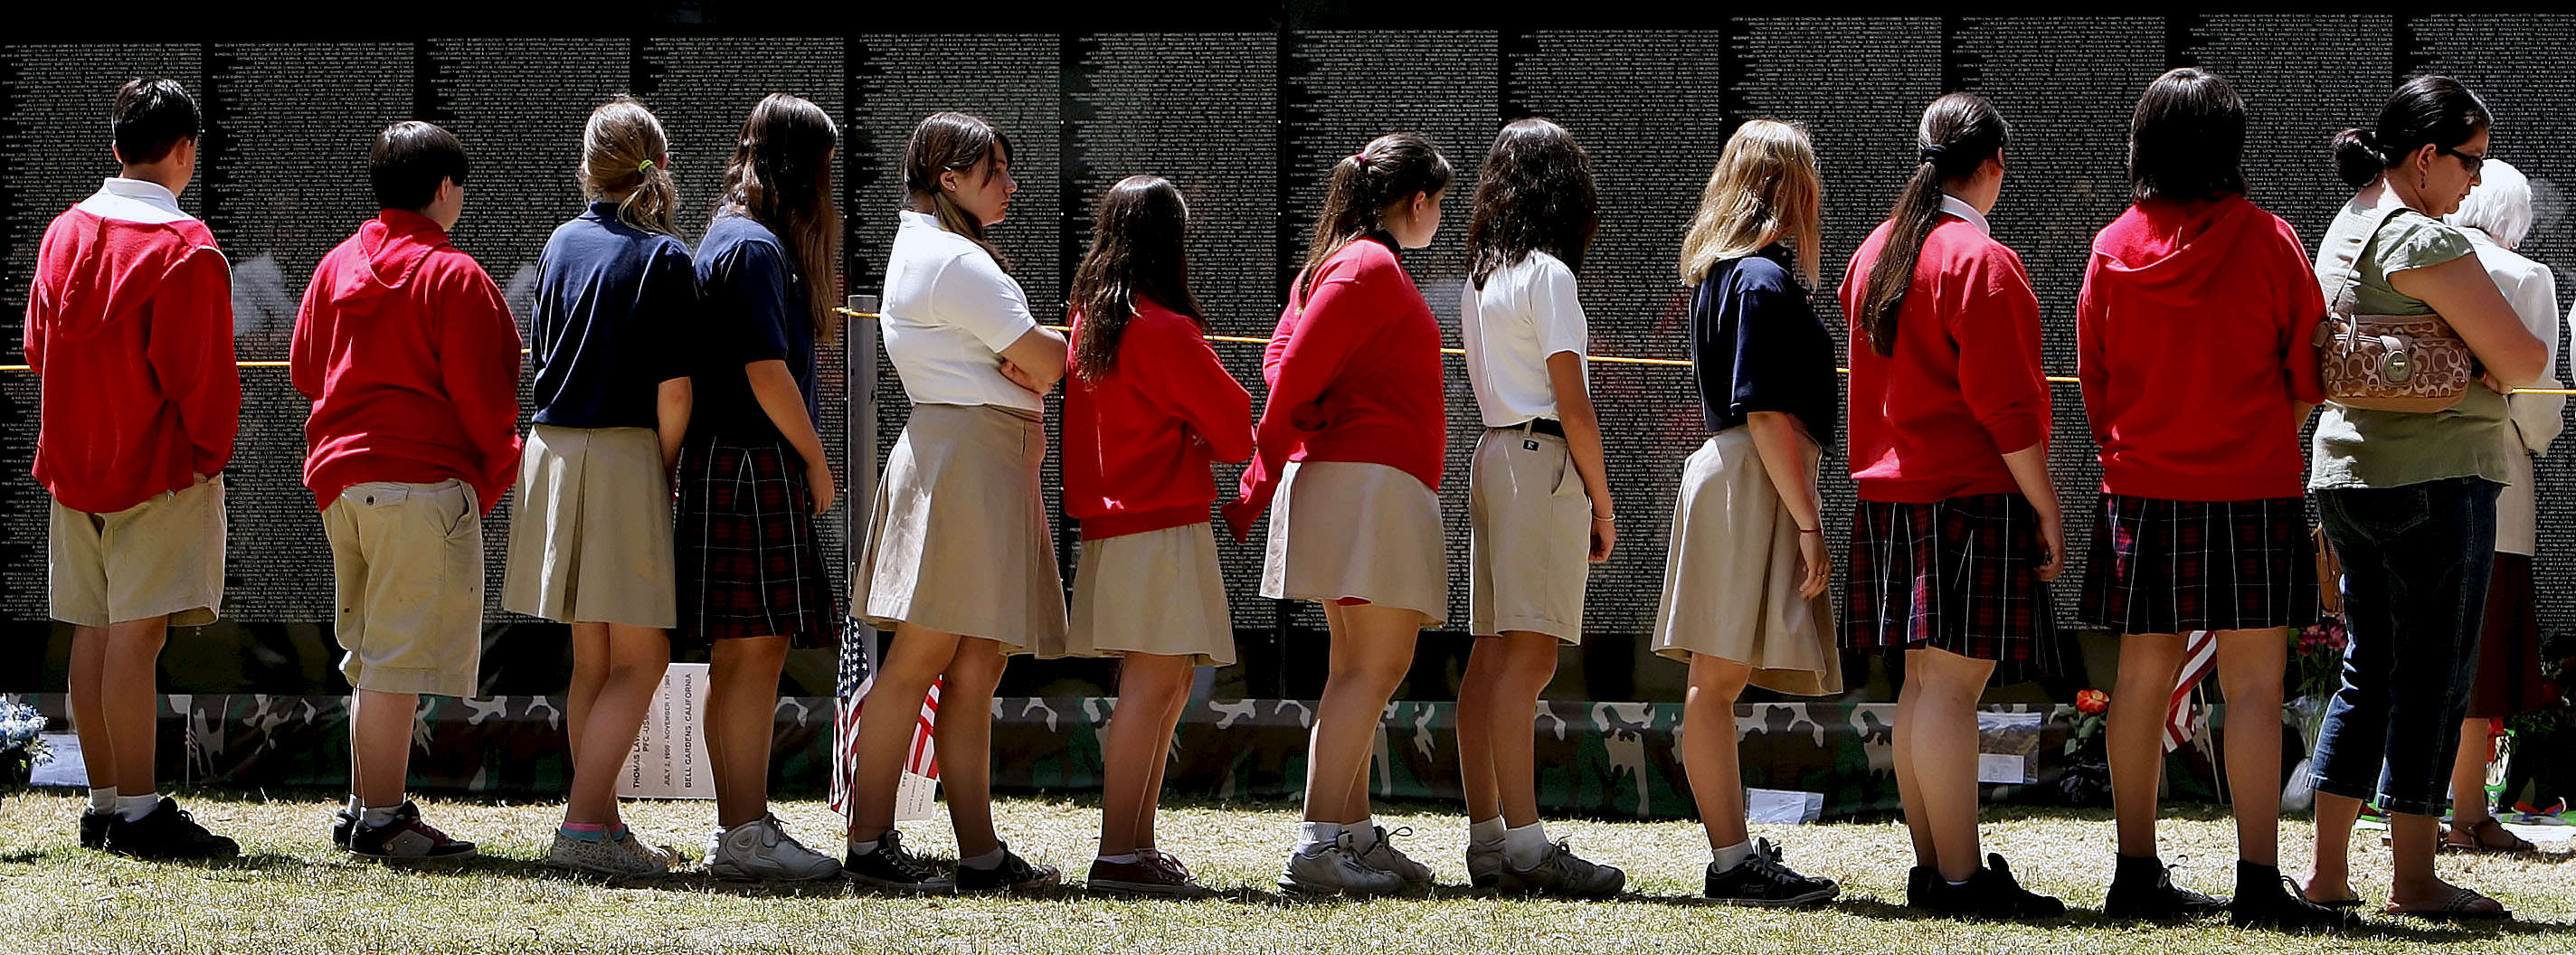 Students from Sacred Heart Academy in Redlands, Calif., walk by the The Moving Wall looking at the names of the fallen soldiers during a class outing.(The Press-Enterprise/ Mark Zaleski)